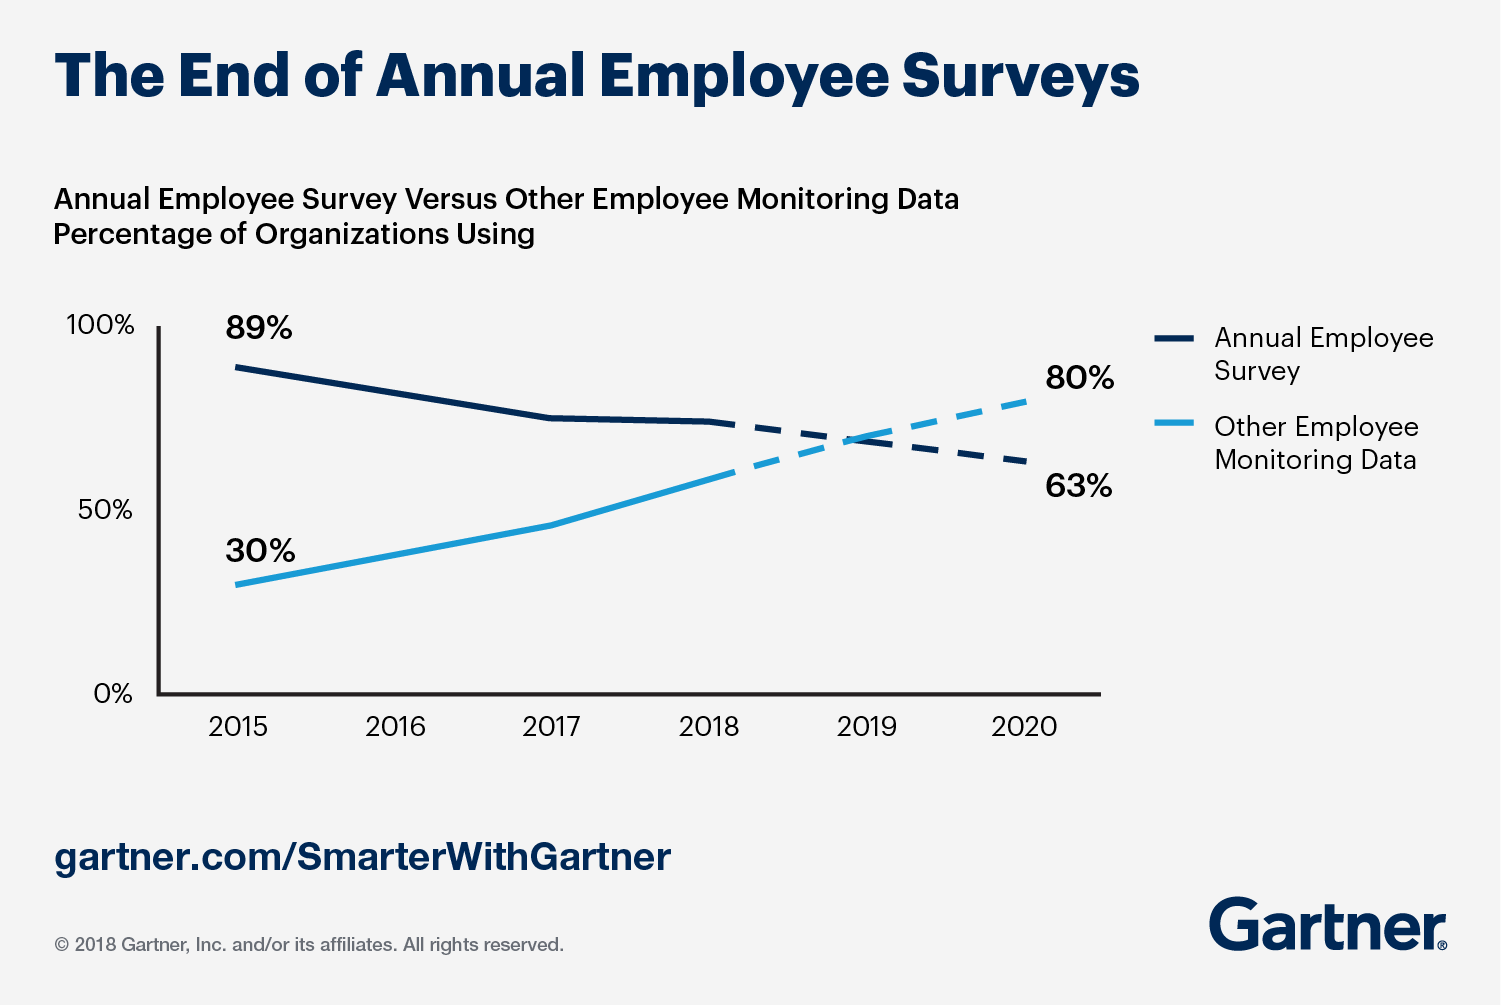 Gartner research finds the end of annual employees surveys